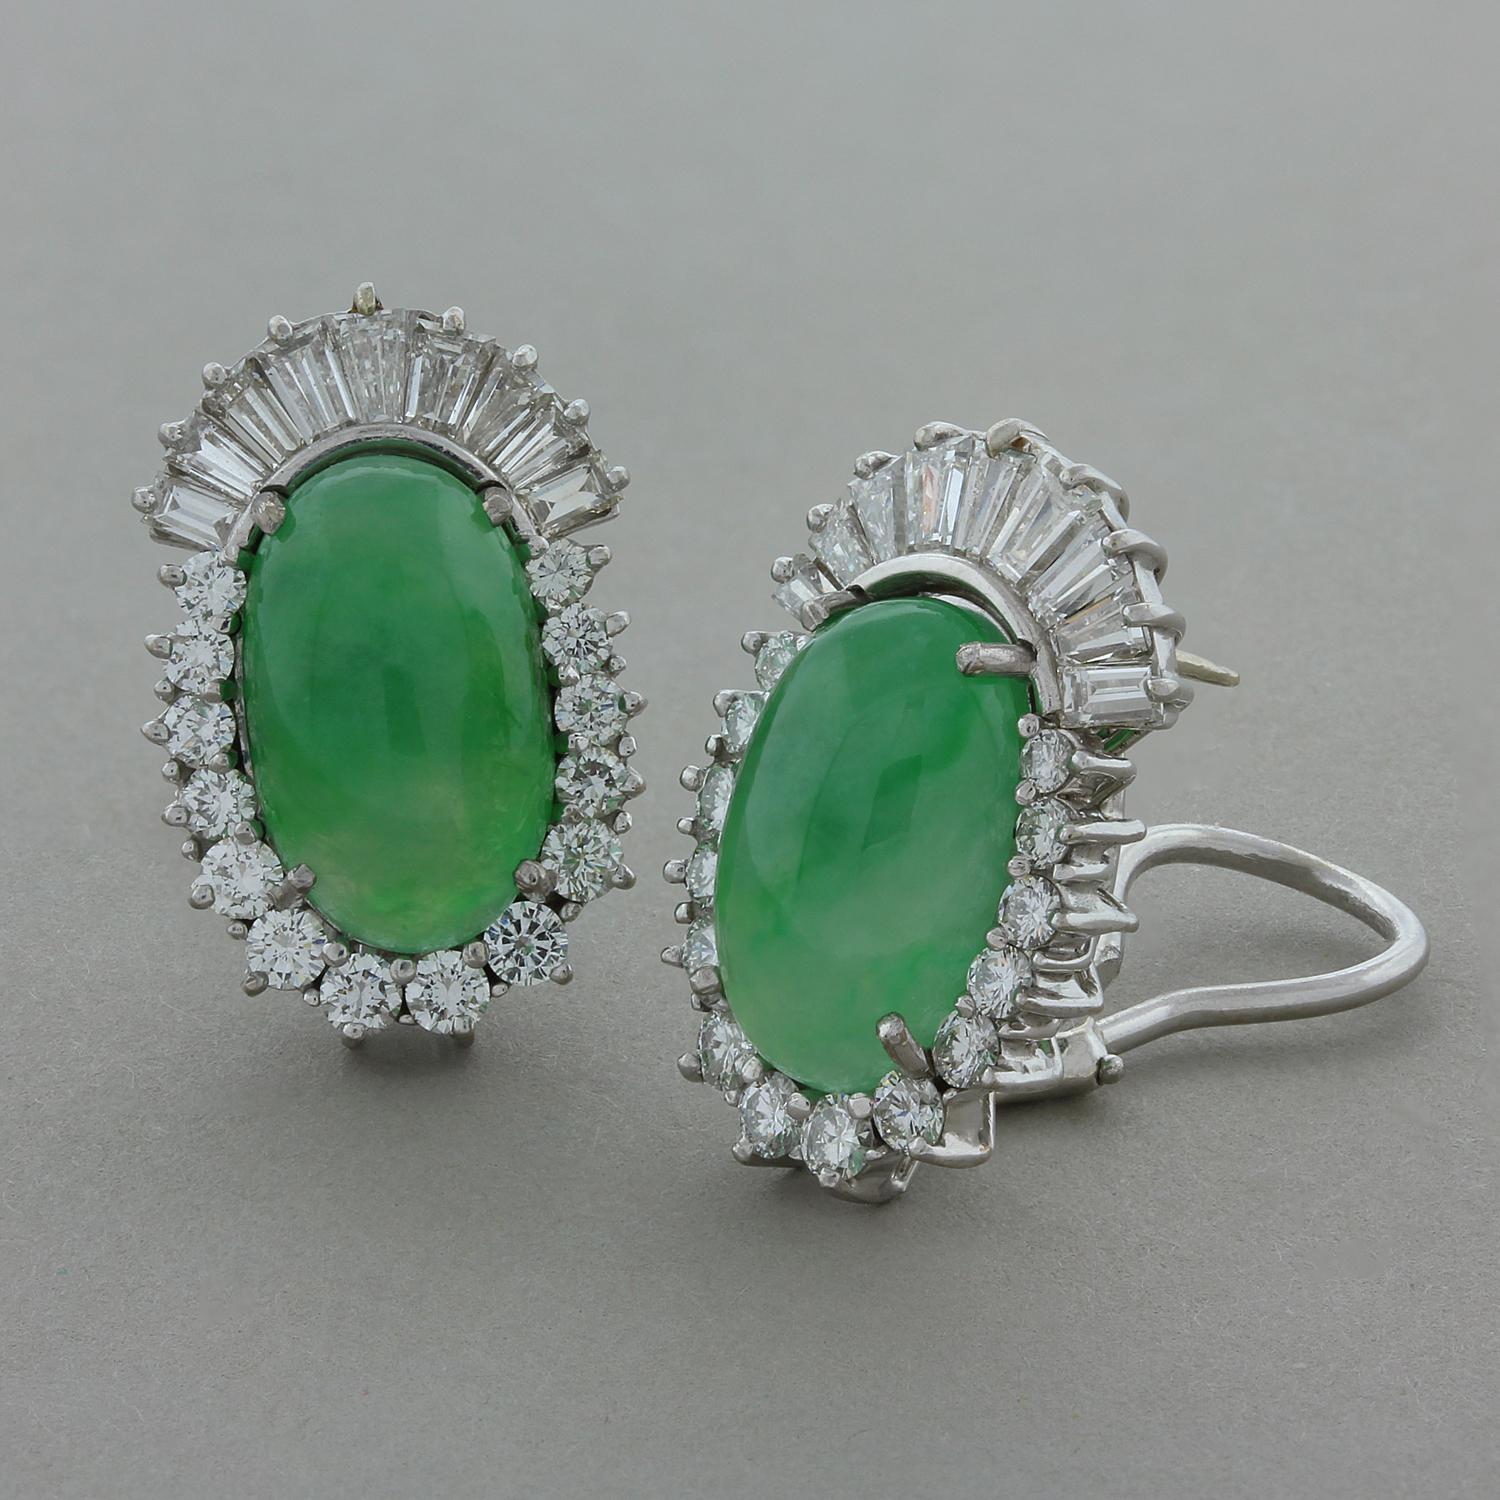 An exquisite pair of Mid-Century jewels featuring two smooth semi-translucent pieces of lustrous jade, true gems. The natural green jade is surrounded 4 carats of round and baguette cut diamonds in a 18K white gold setting with a secure omega clip